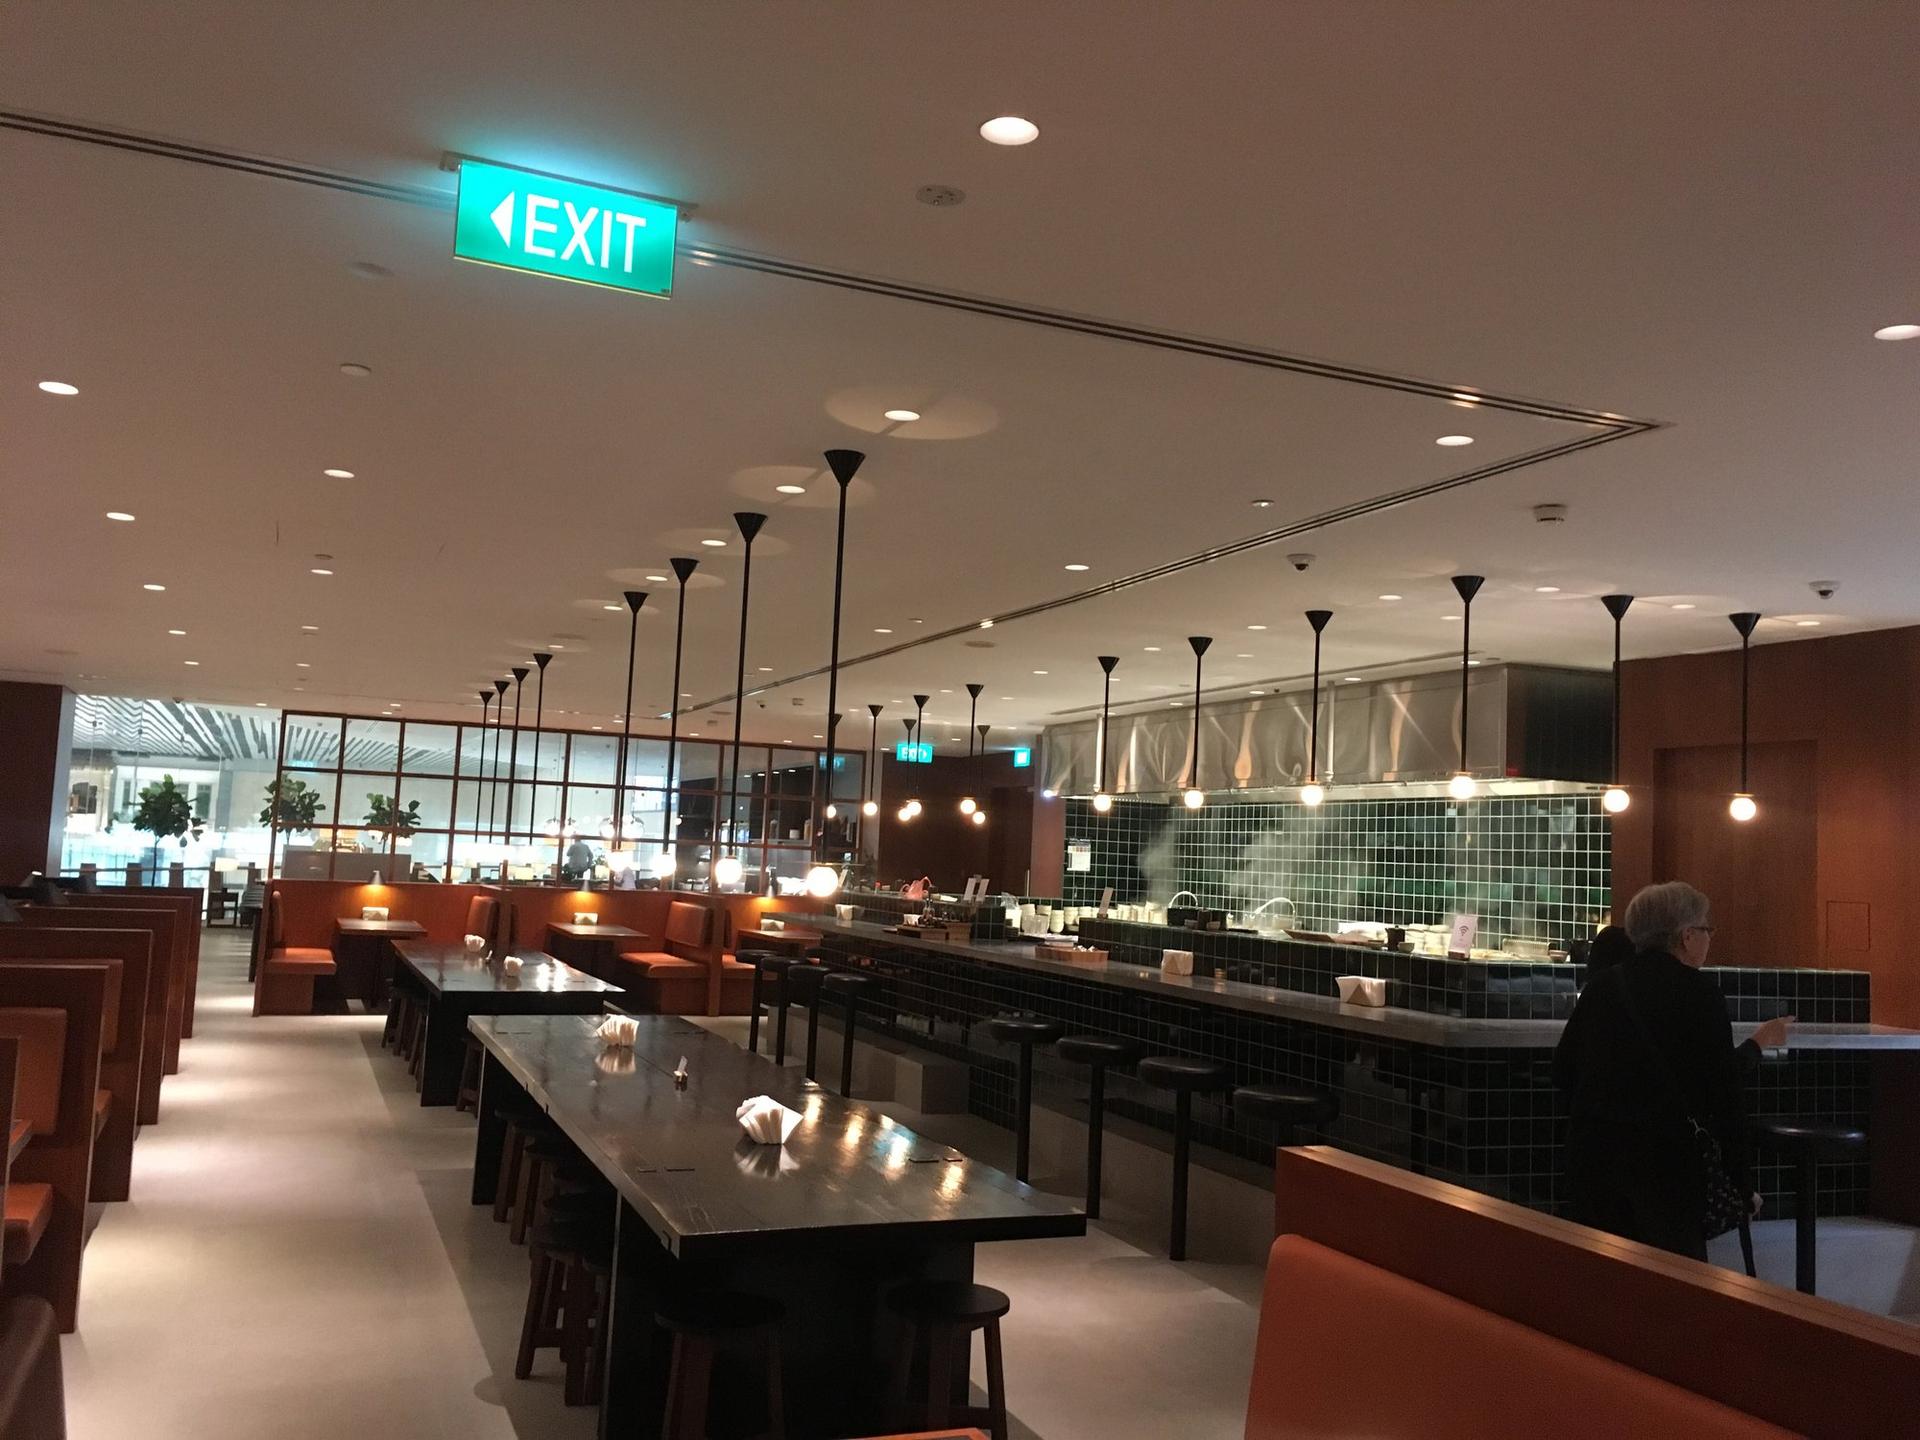 Cathay Pacific Lounge image 58 of 60